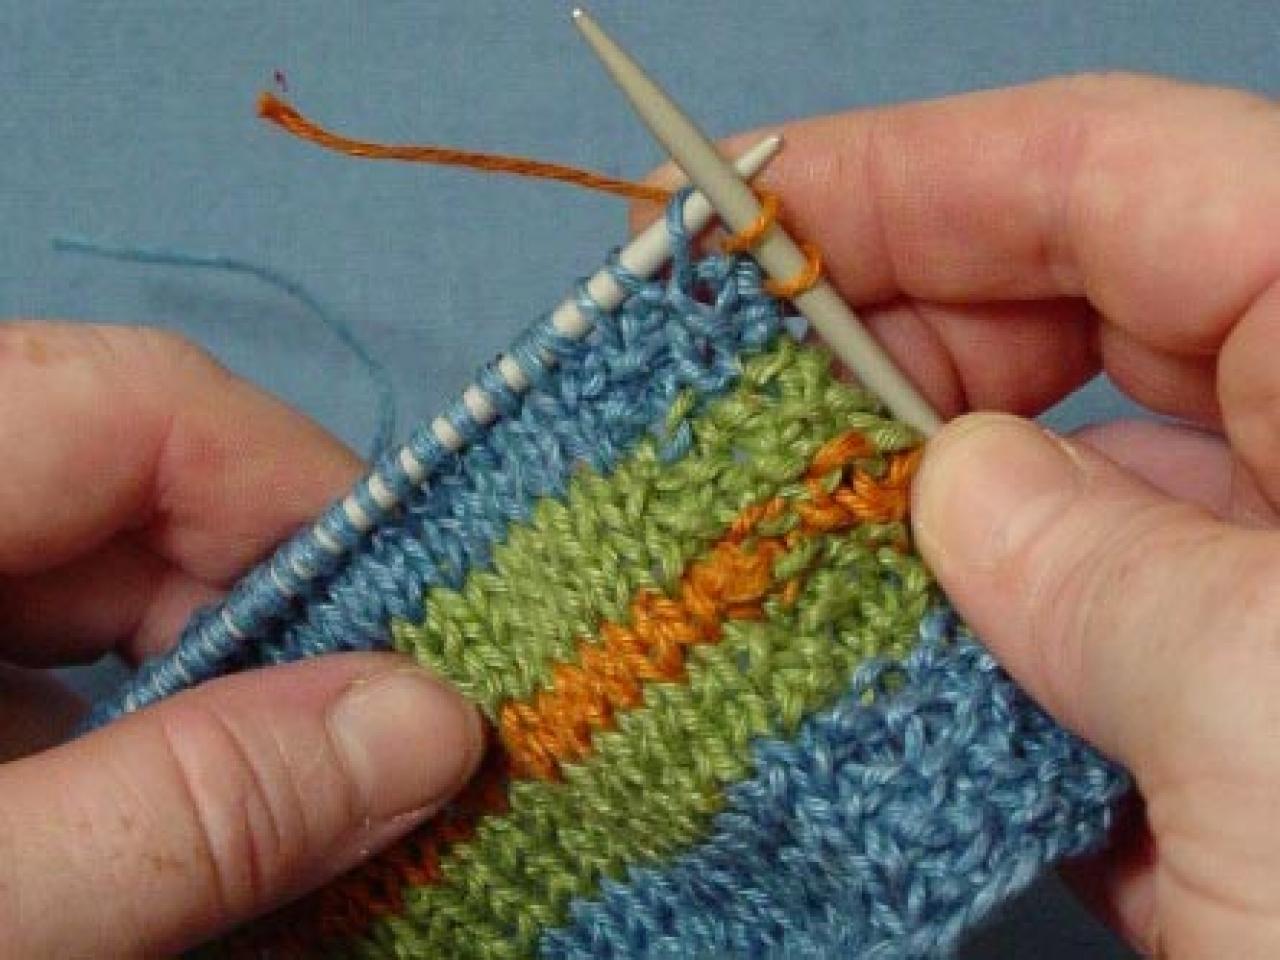 What are some of the knitting specific terms used for the craft?